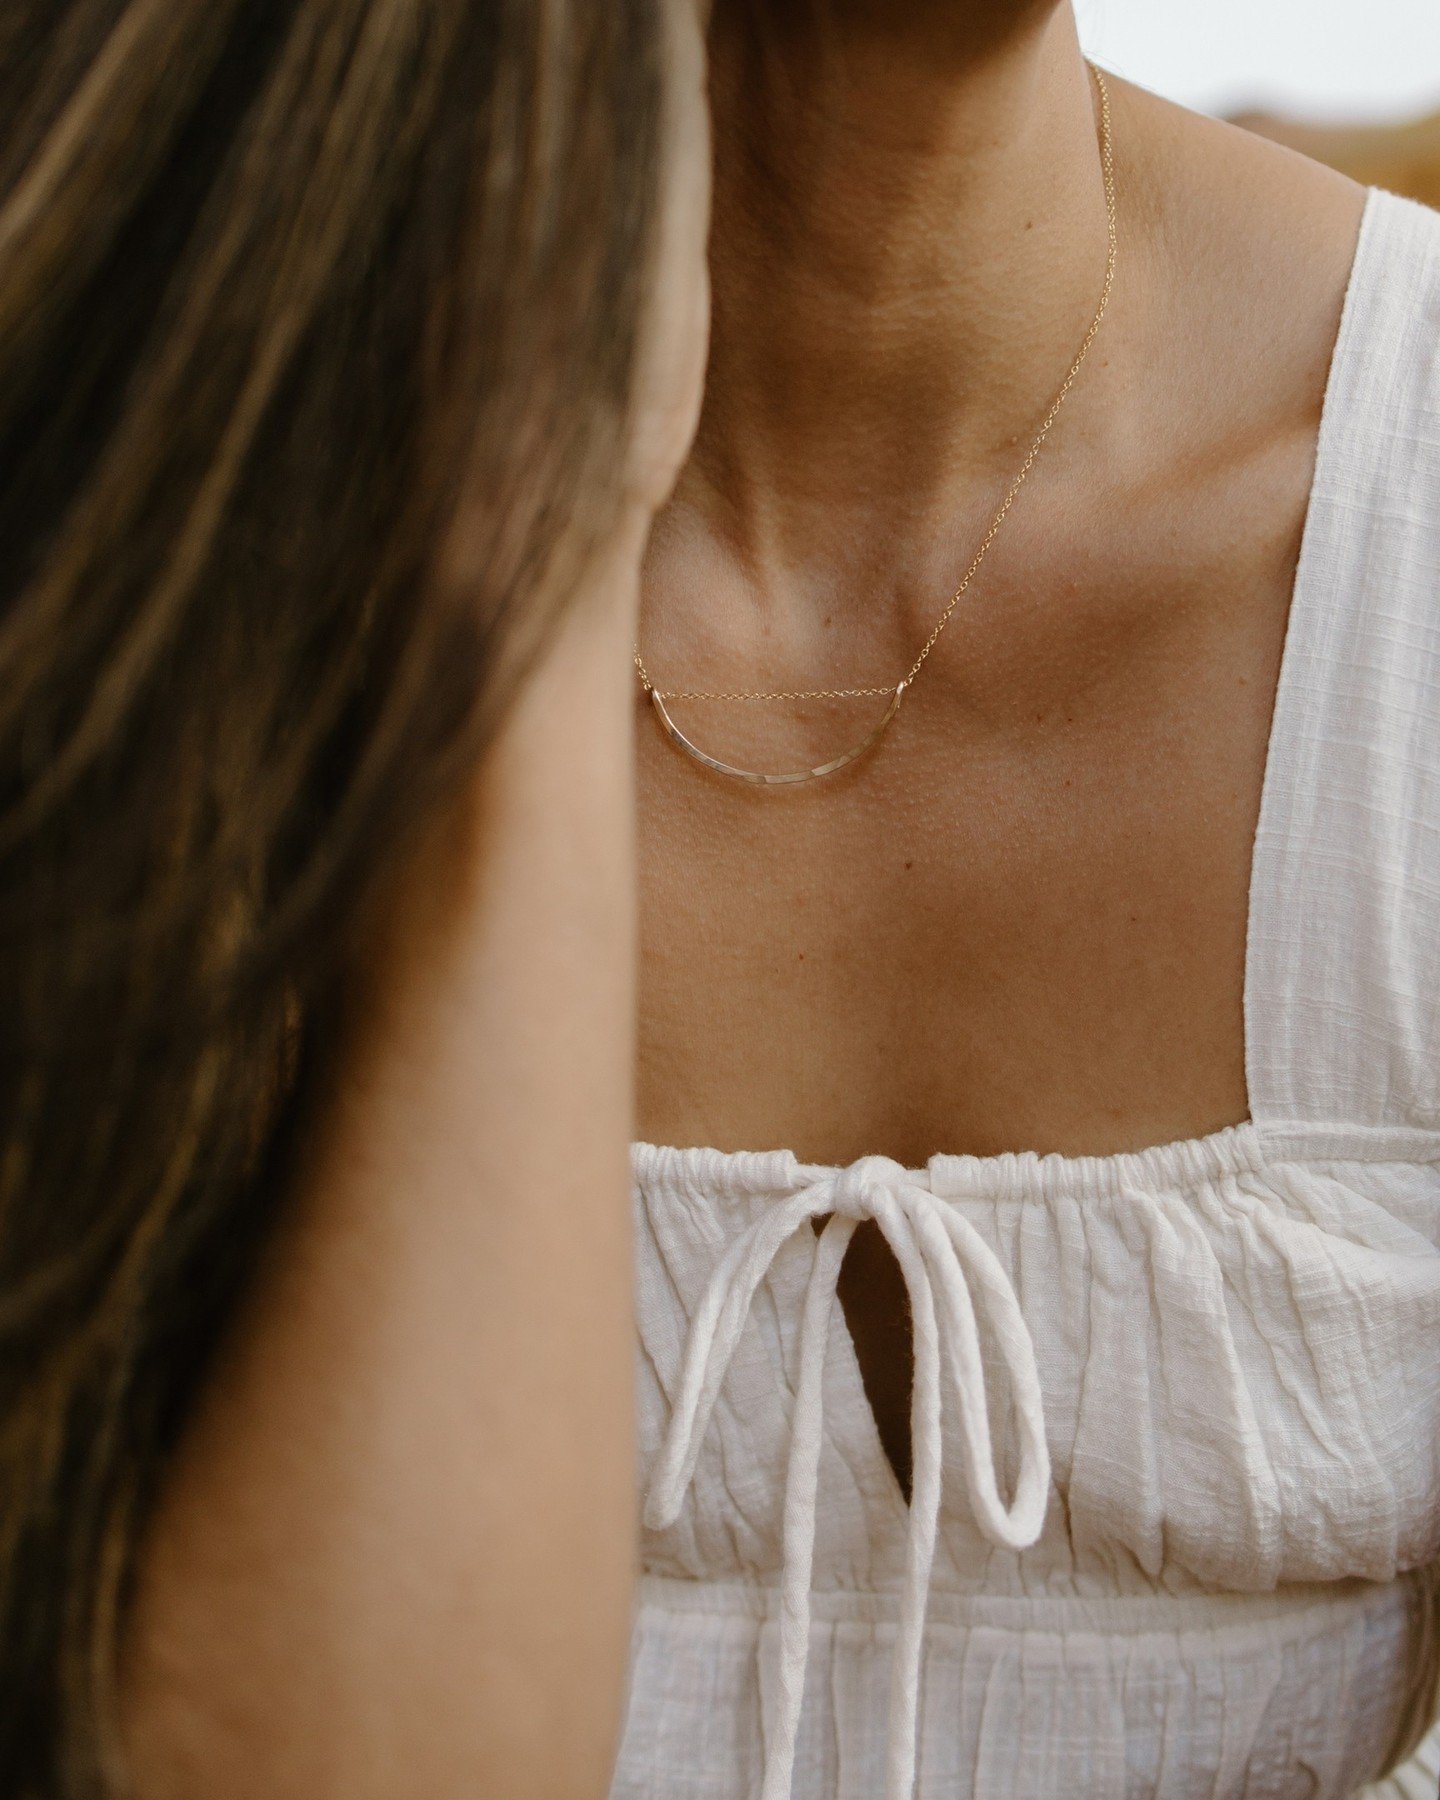 The half moon necklace has been one of our top sellers for years now! Hammered (by hand) 14k gold fill wire. Now available in three sizes! 🌙⁠
⁠
#mirakauai #minimalistjewelry #handmadejewelry #goldjewelry #14kgoldjewelry #goldnecklace #hammeredgoldne